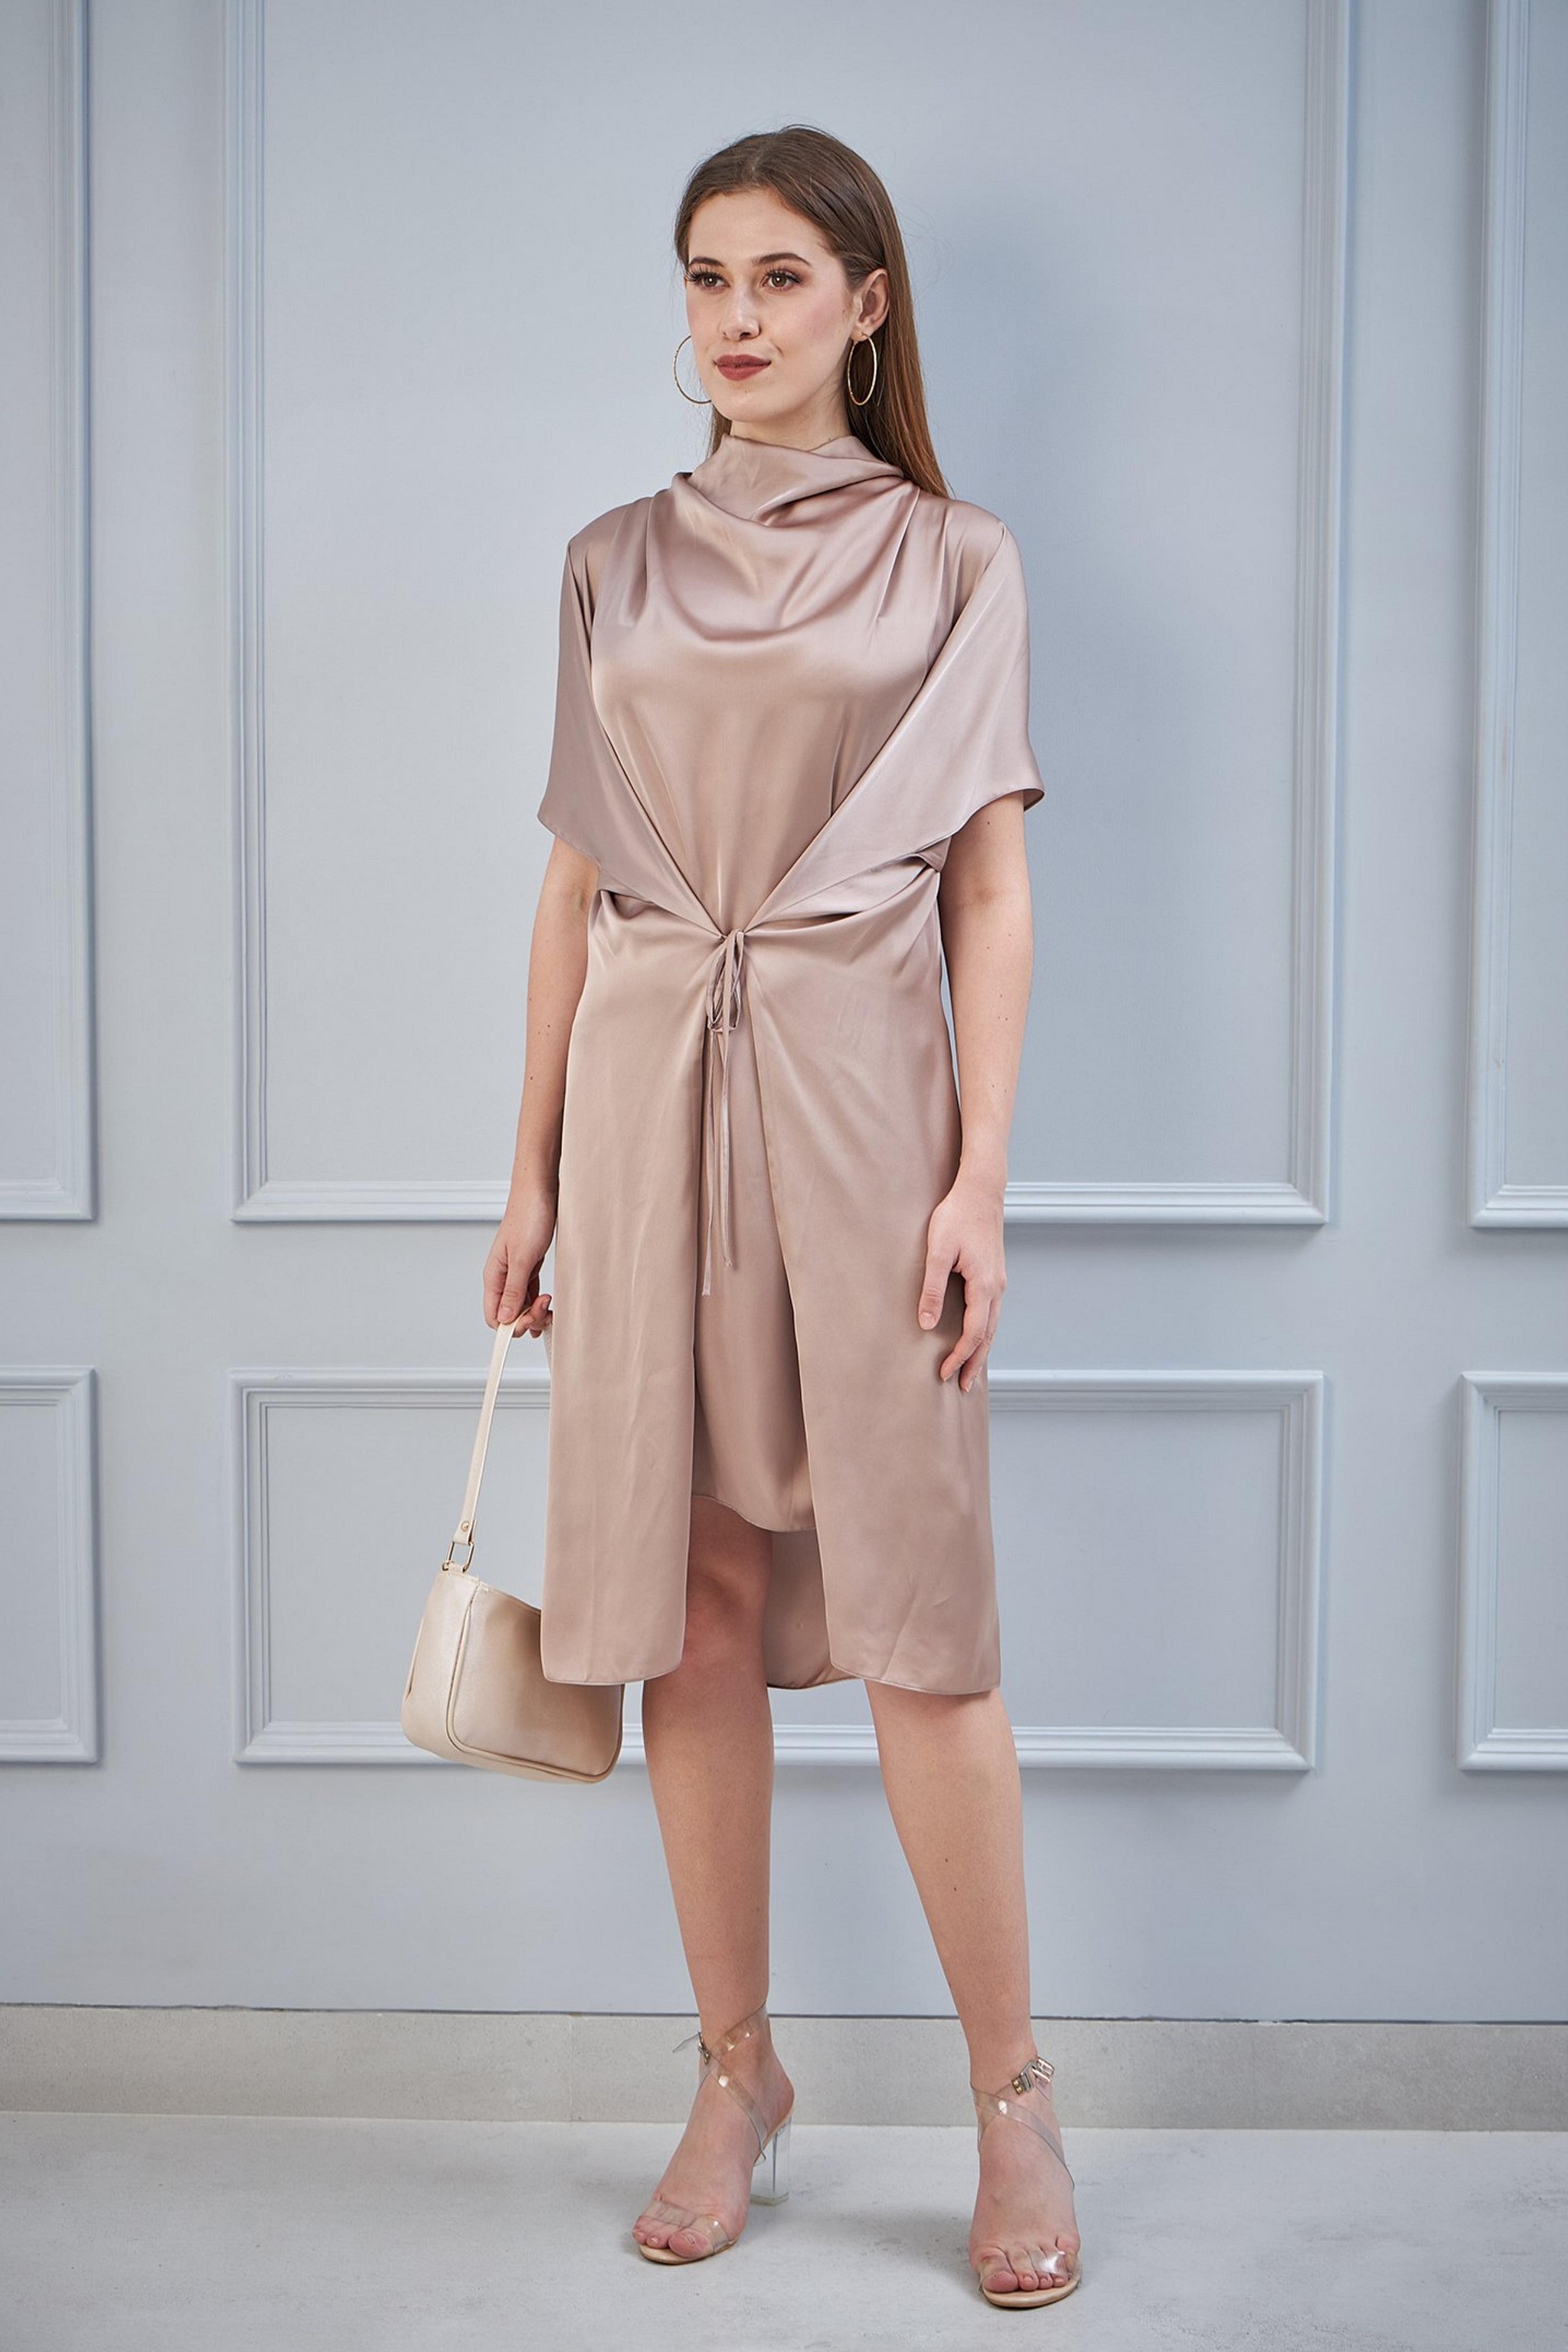 Dull Nude Drape Dress With Tie Up Flap